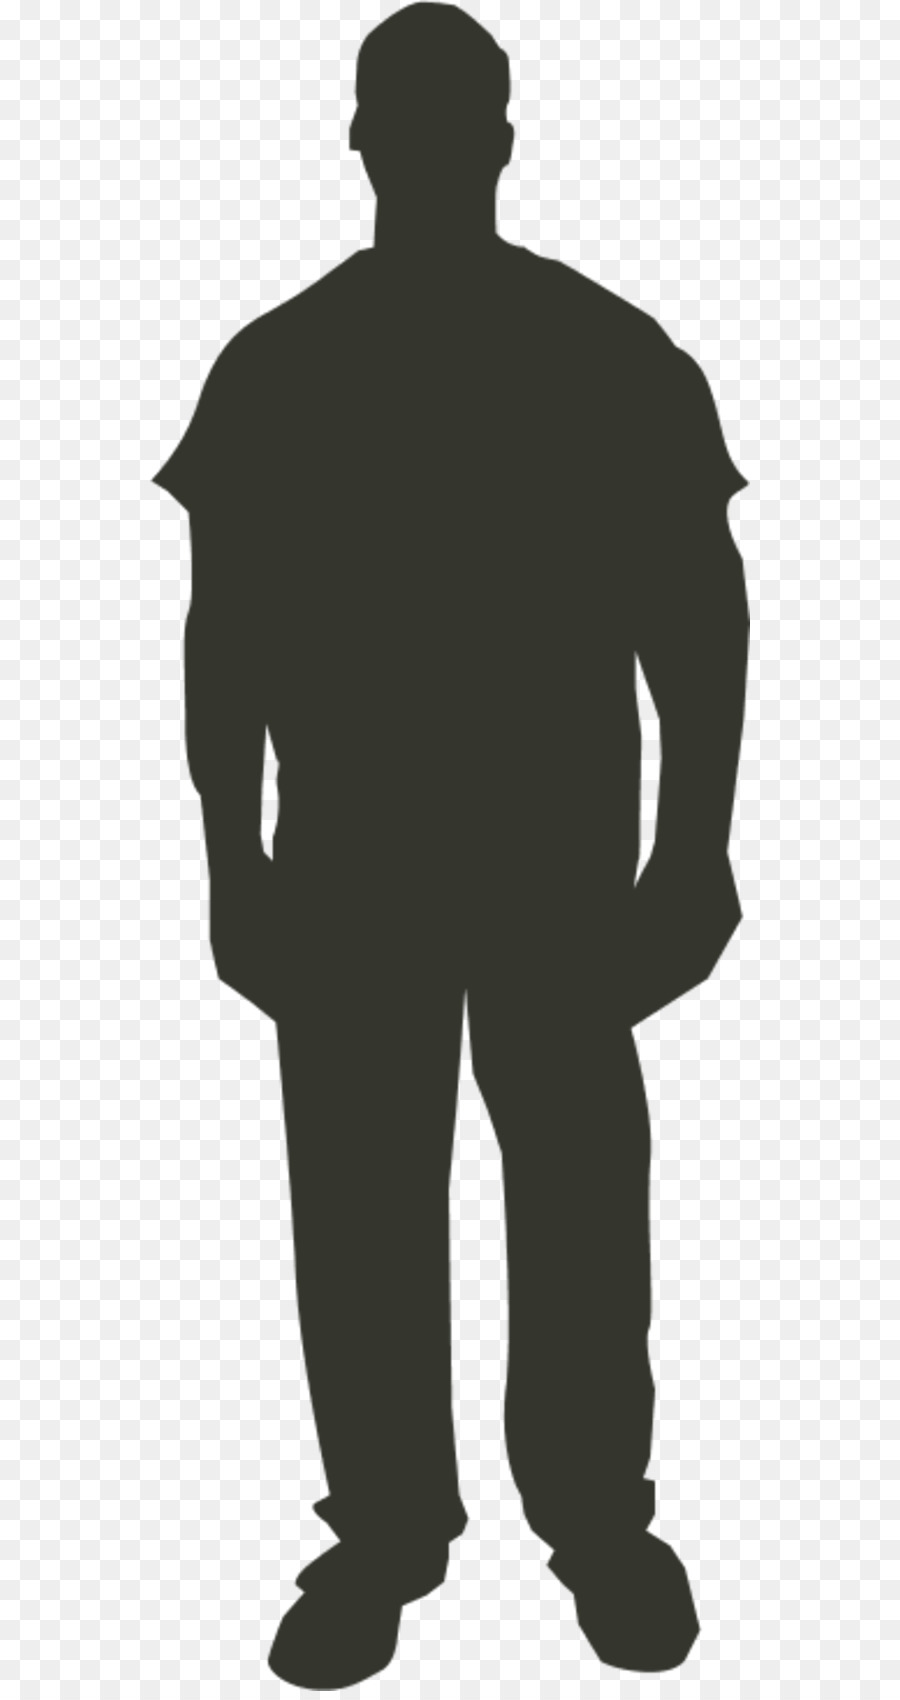 Person Outline Clip art - Man Standing Silhouette png download - 600*1691 - Free Transparent Person png Download.